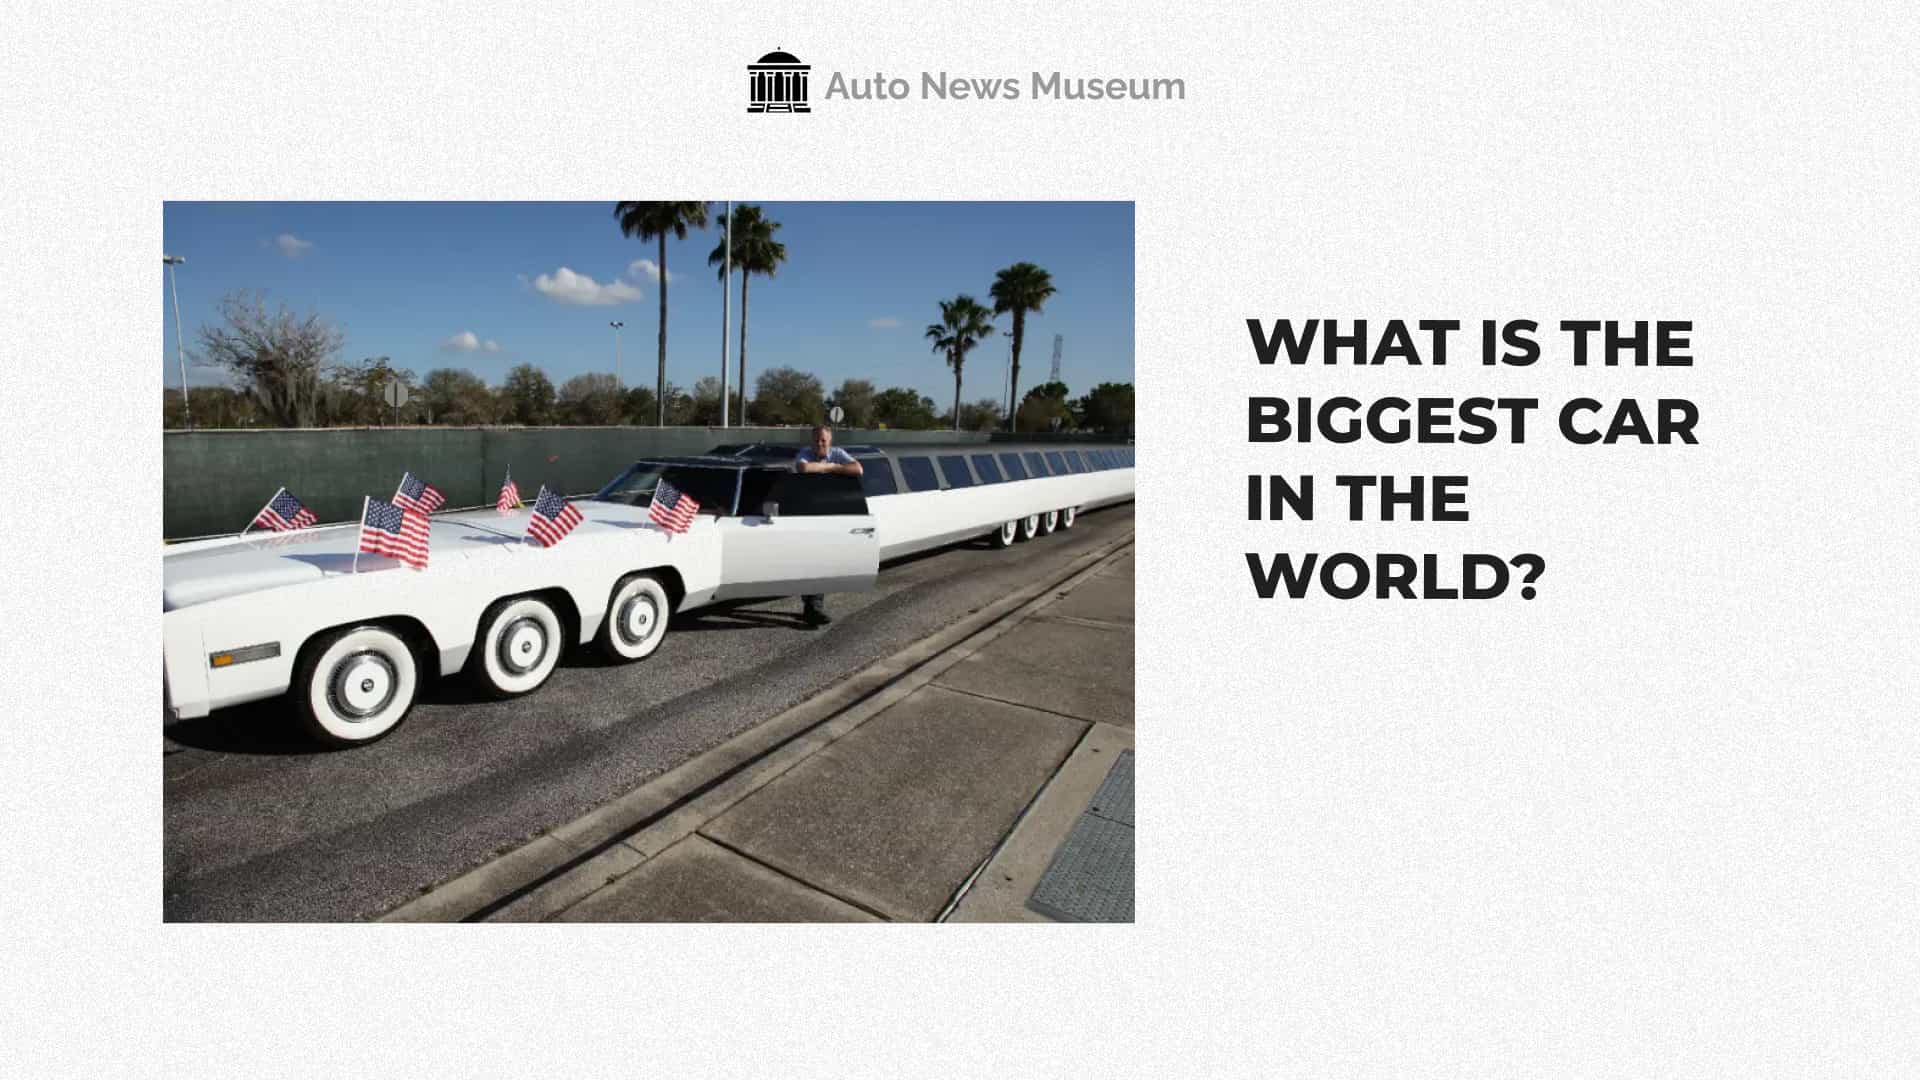 The World’s Biggest Car: A Monument to Engineering Marvel